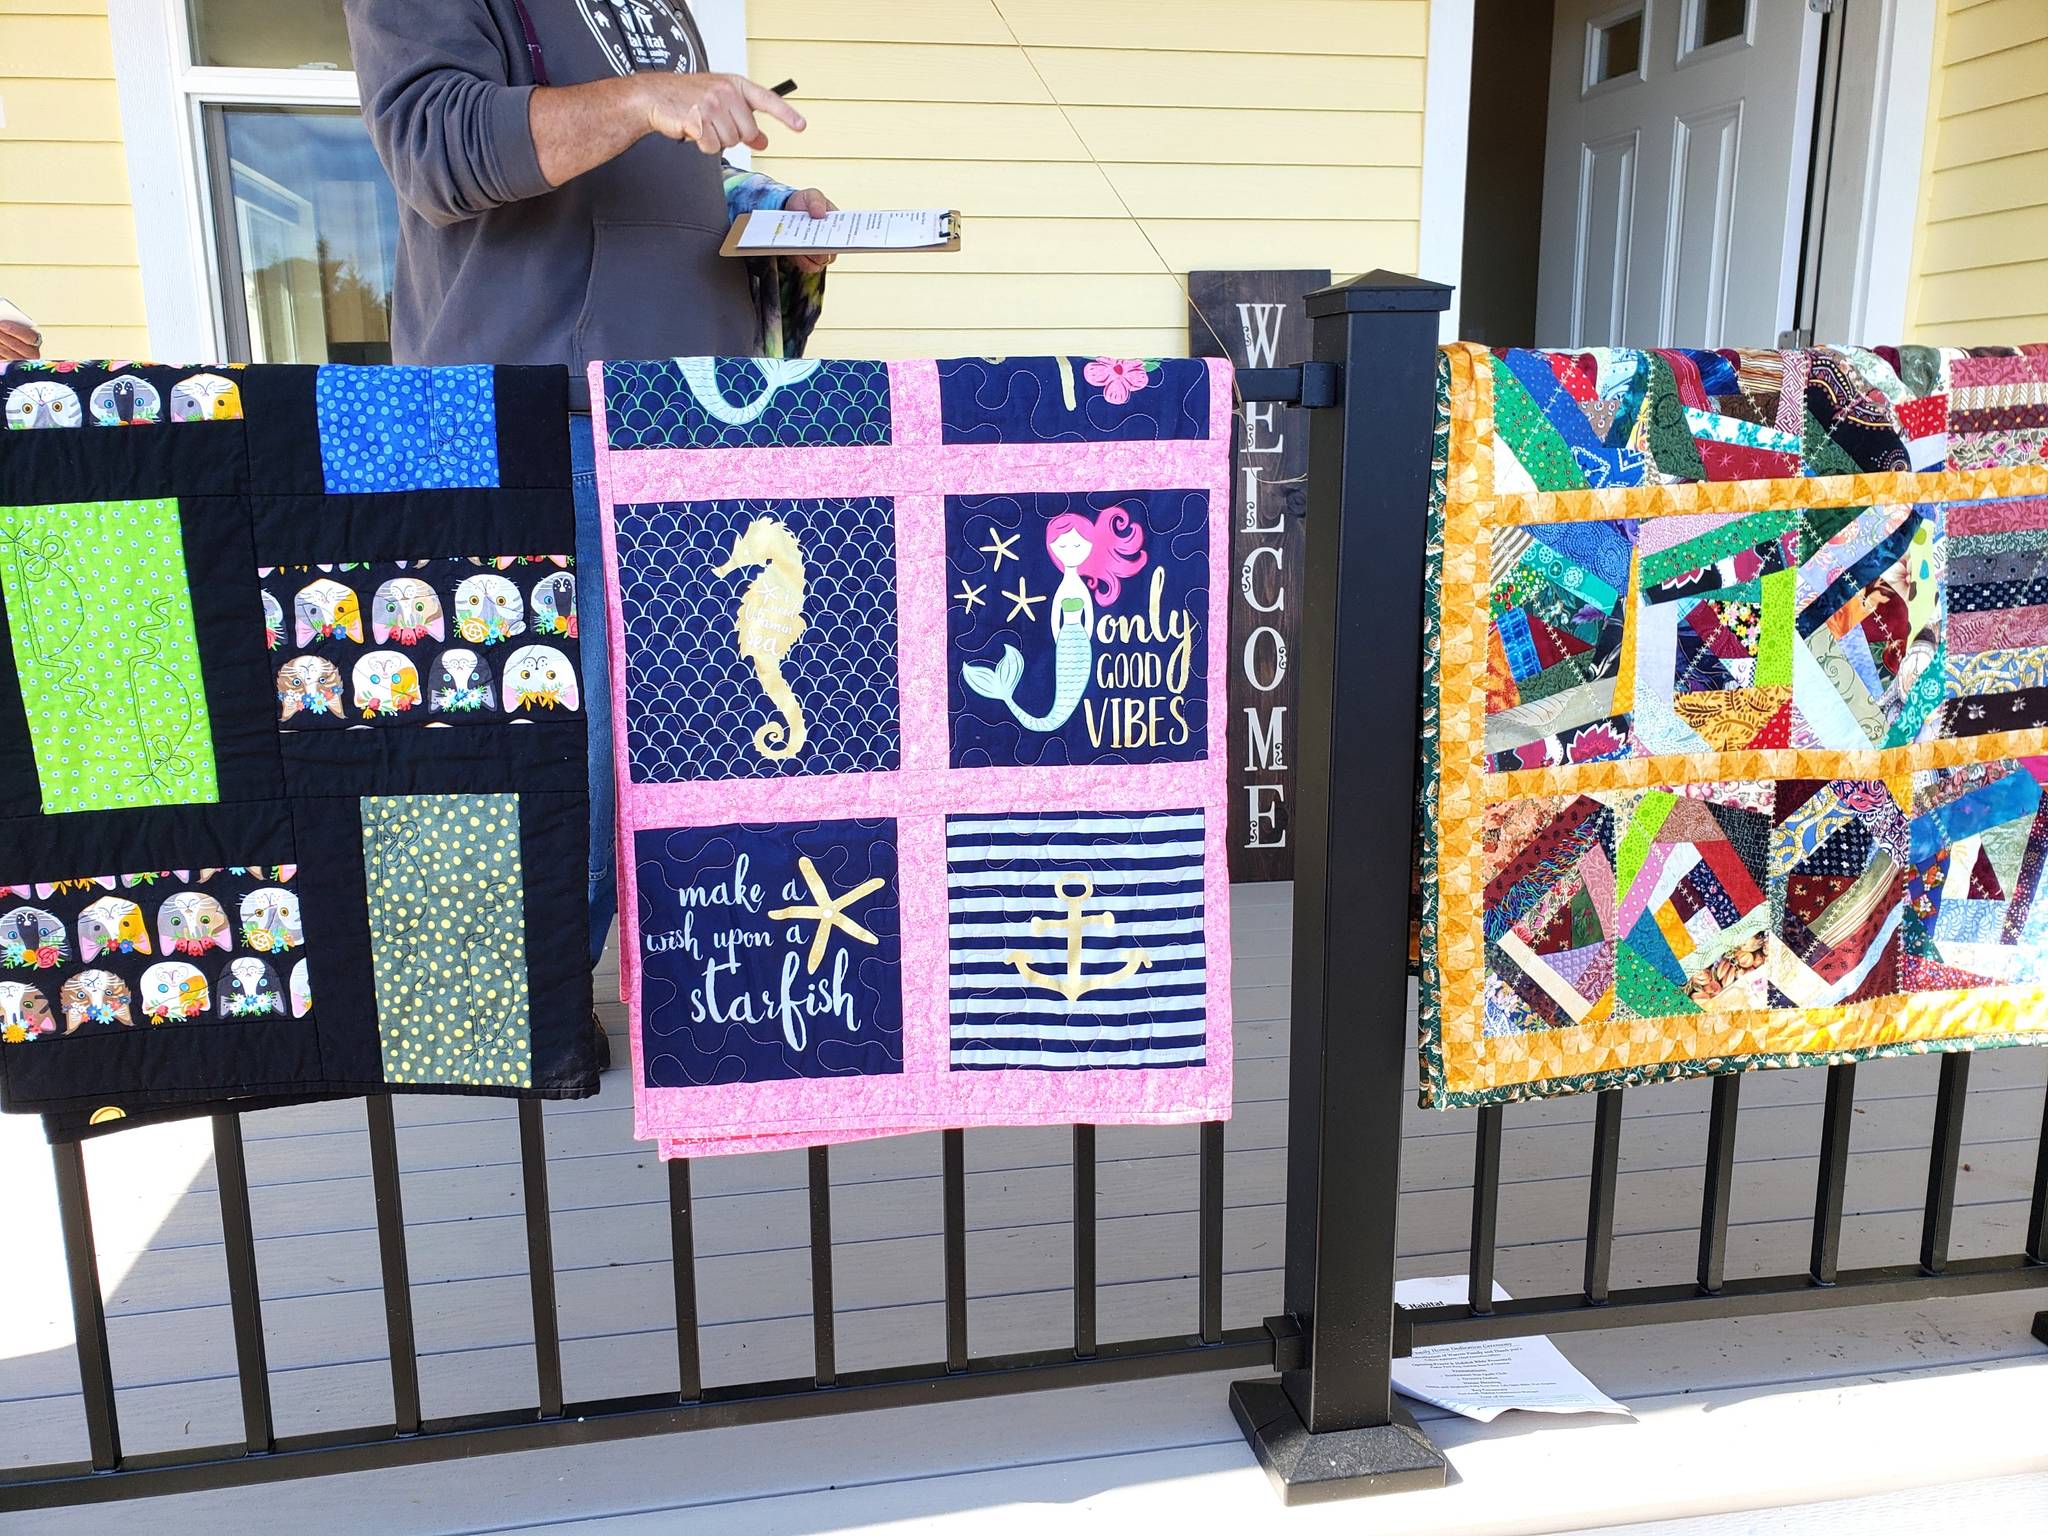 In June, Susan Bermel presented three quilts from the Sunbonnet Sue Quilt Club to family members at their new new home courtesy of Habitat for Humanity of Clallam County. Bermel made the quilts as part of their Community Quilt program with Ilse Osier and Julie Malone. Photo courtesy of Susan Bermel